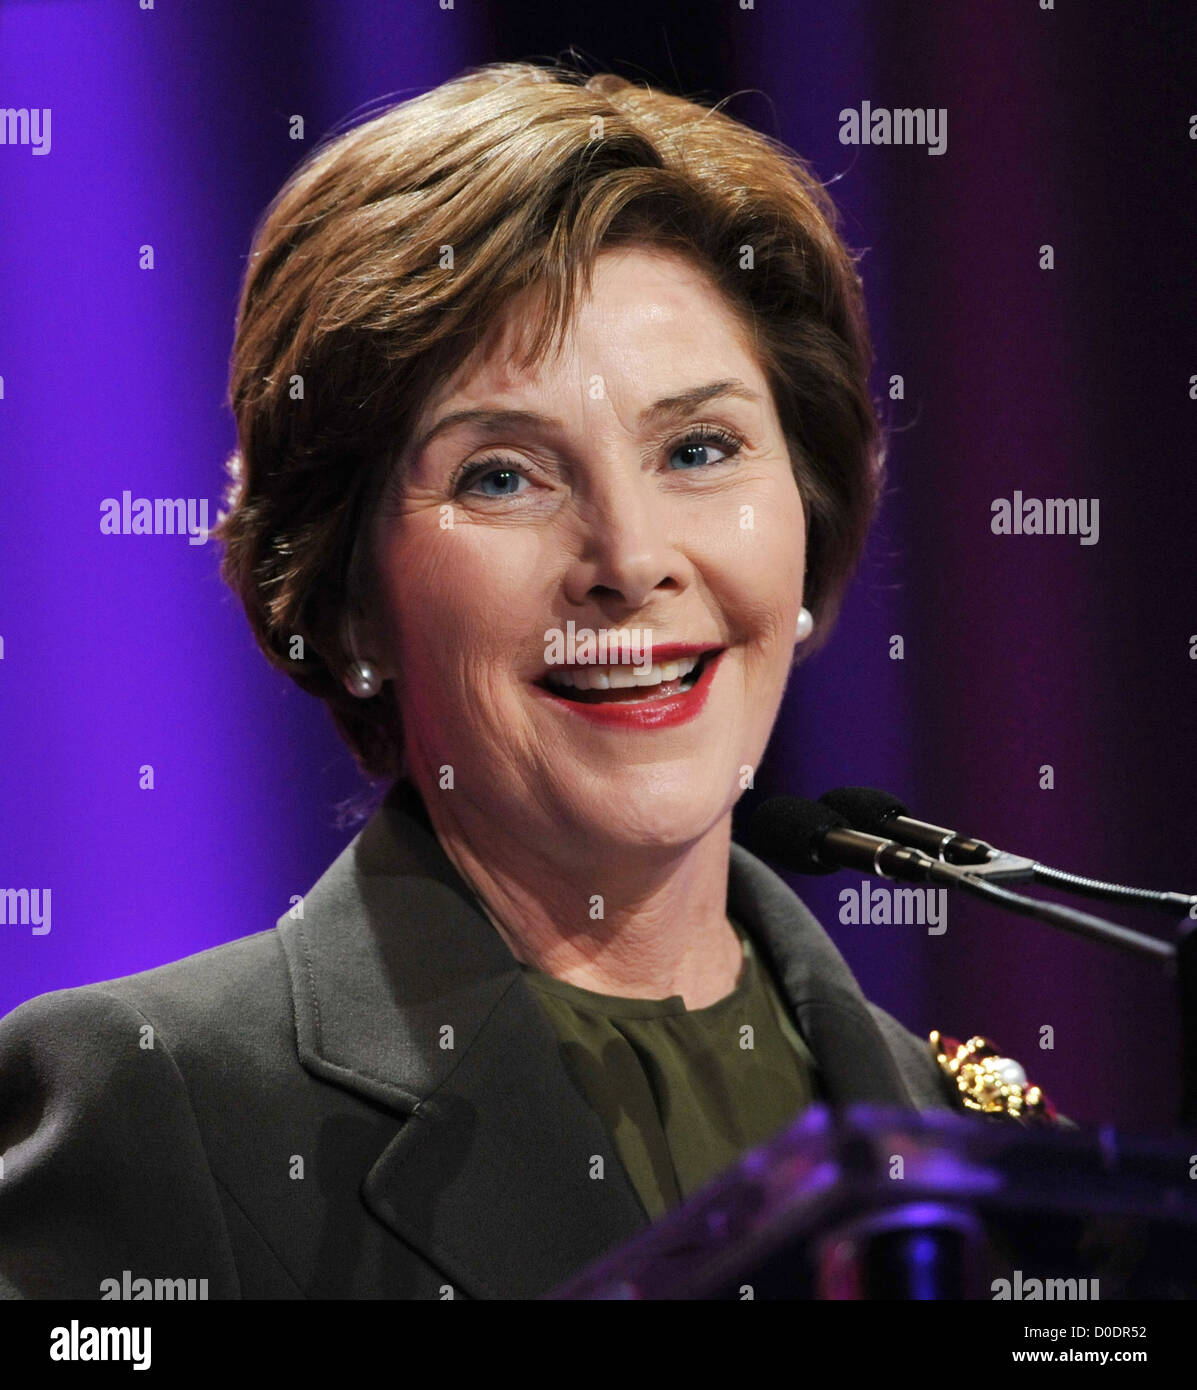 Laura Bush at the 2010 Womens conference held at the Long Beach convention centre Long Beach, California - 26.10.10 Stock Photo